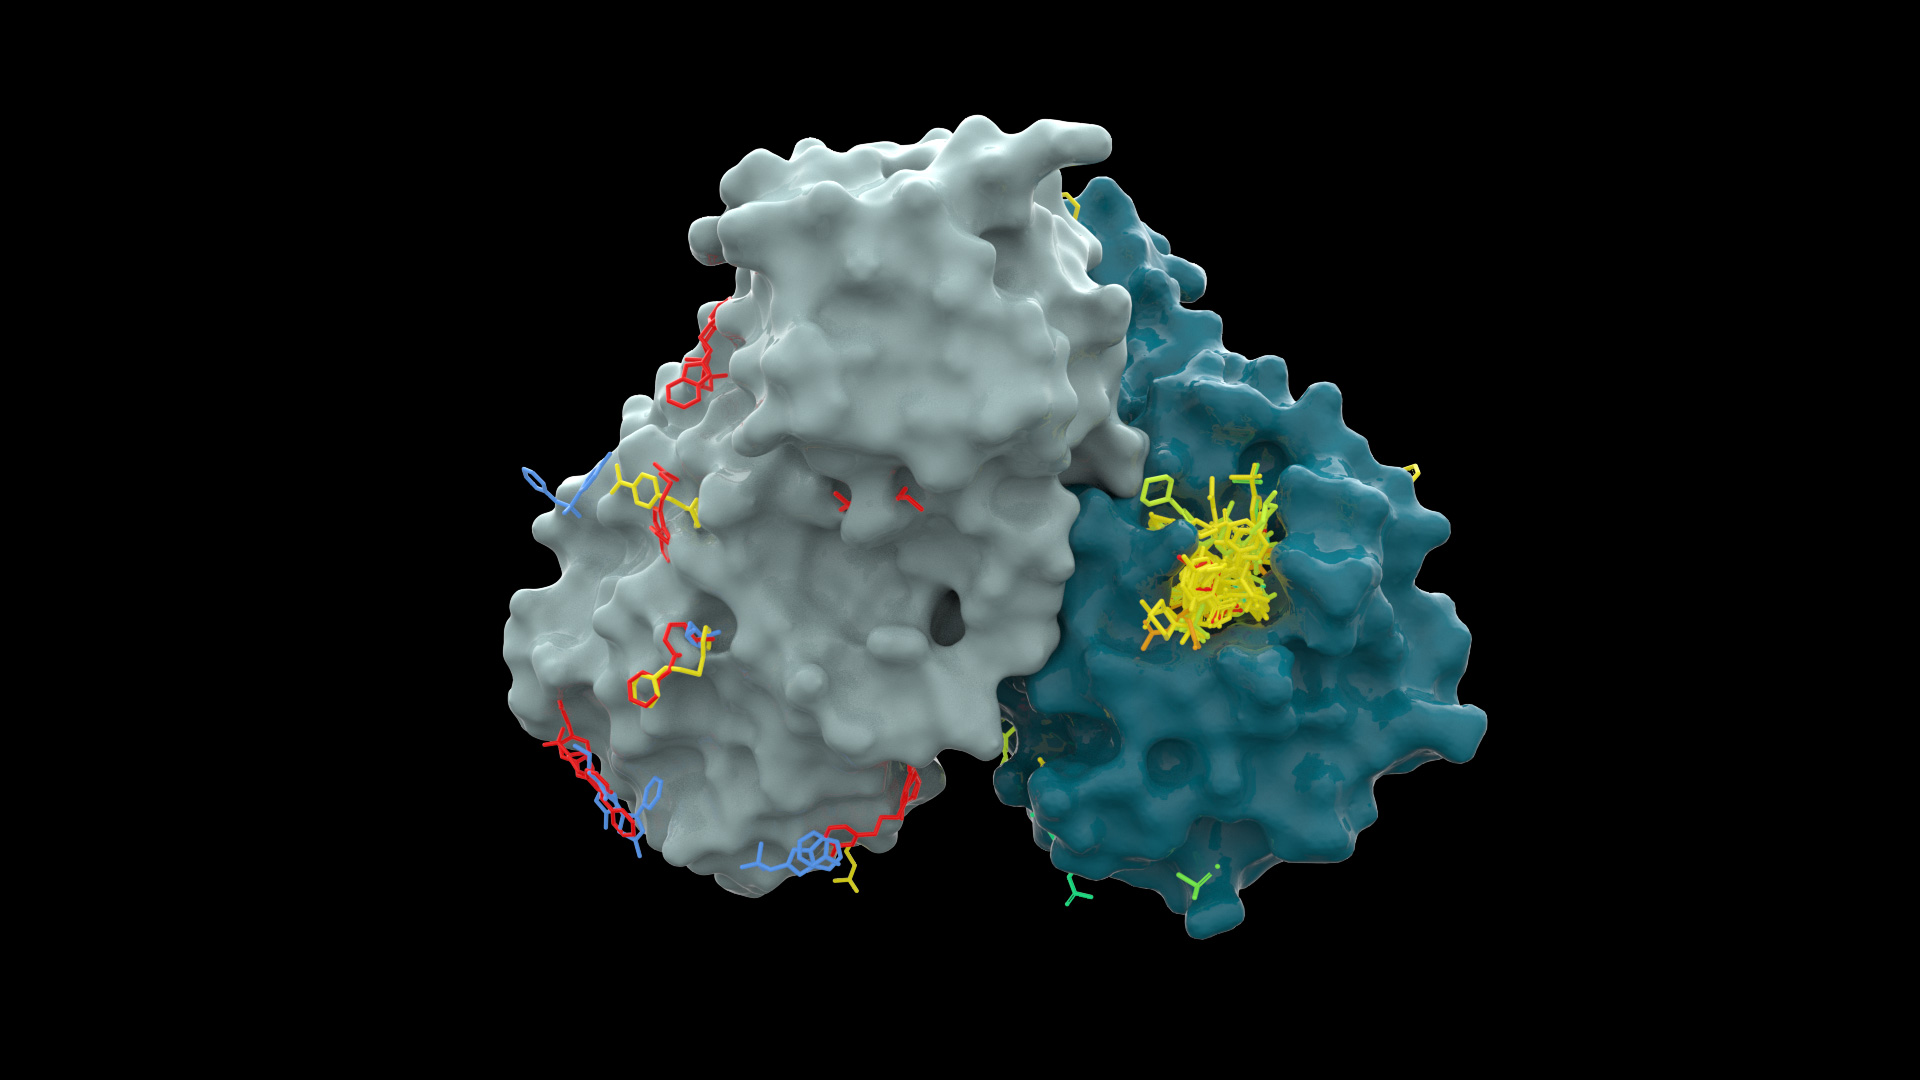 Dimer-All-Ligands-Bound : (Molecular) view of a key component of the SARS-CoV-2 virus called MPro (Green/Grey) with drug site targets identified (yellow).